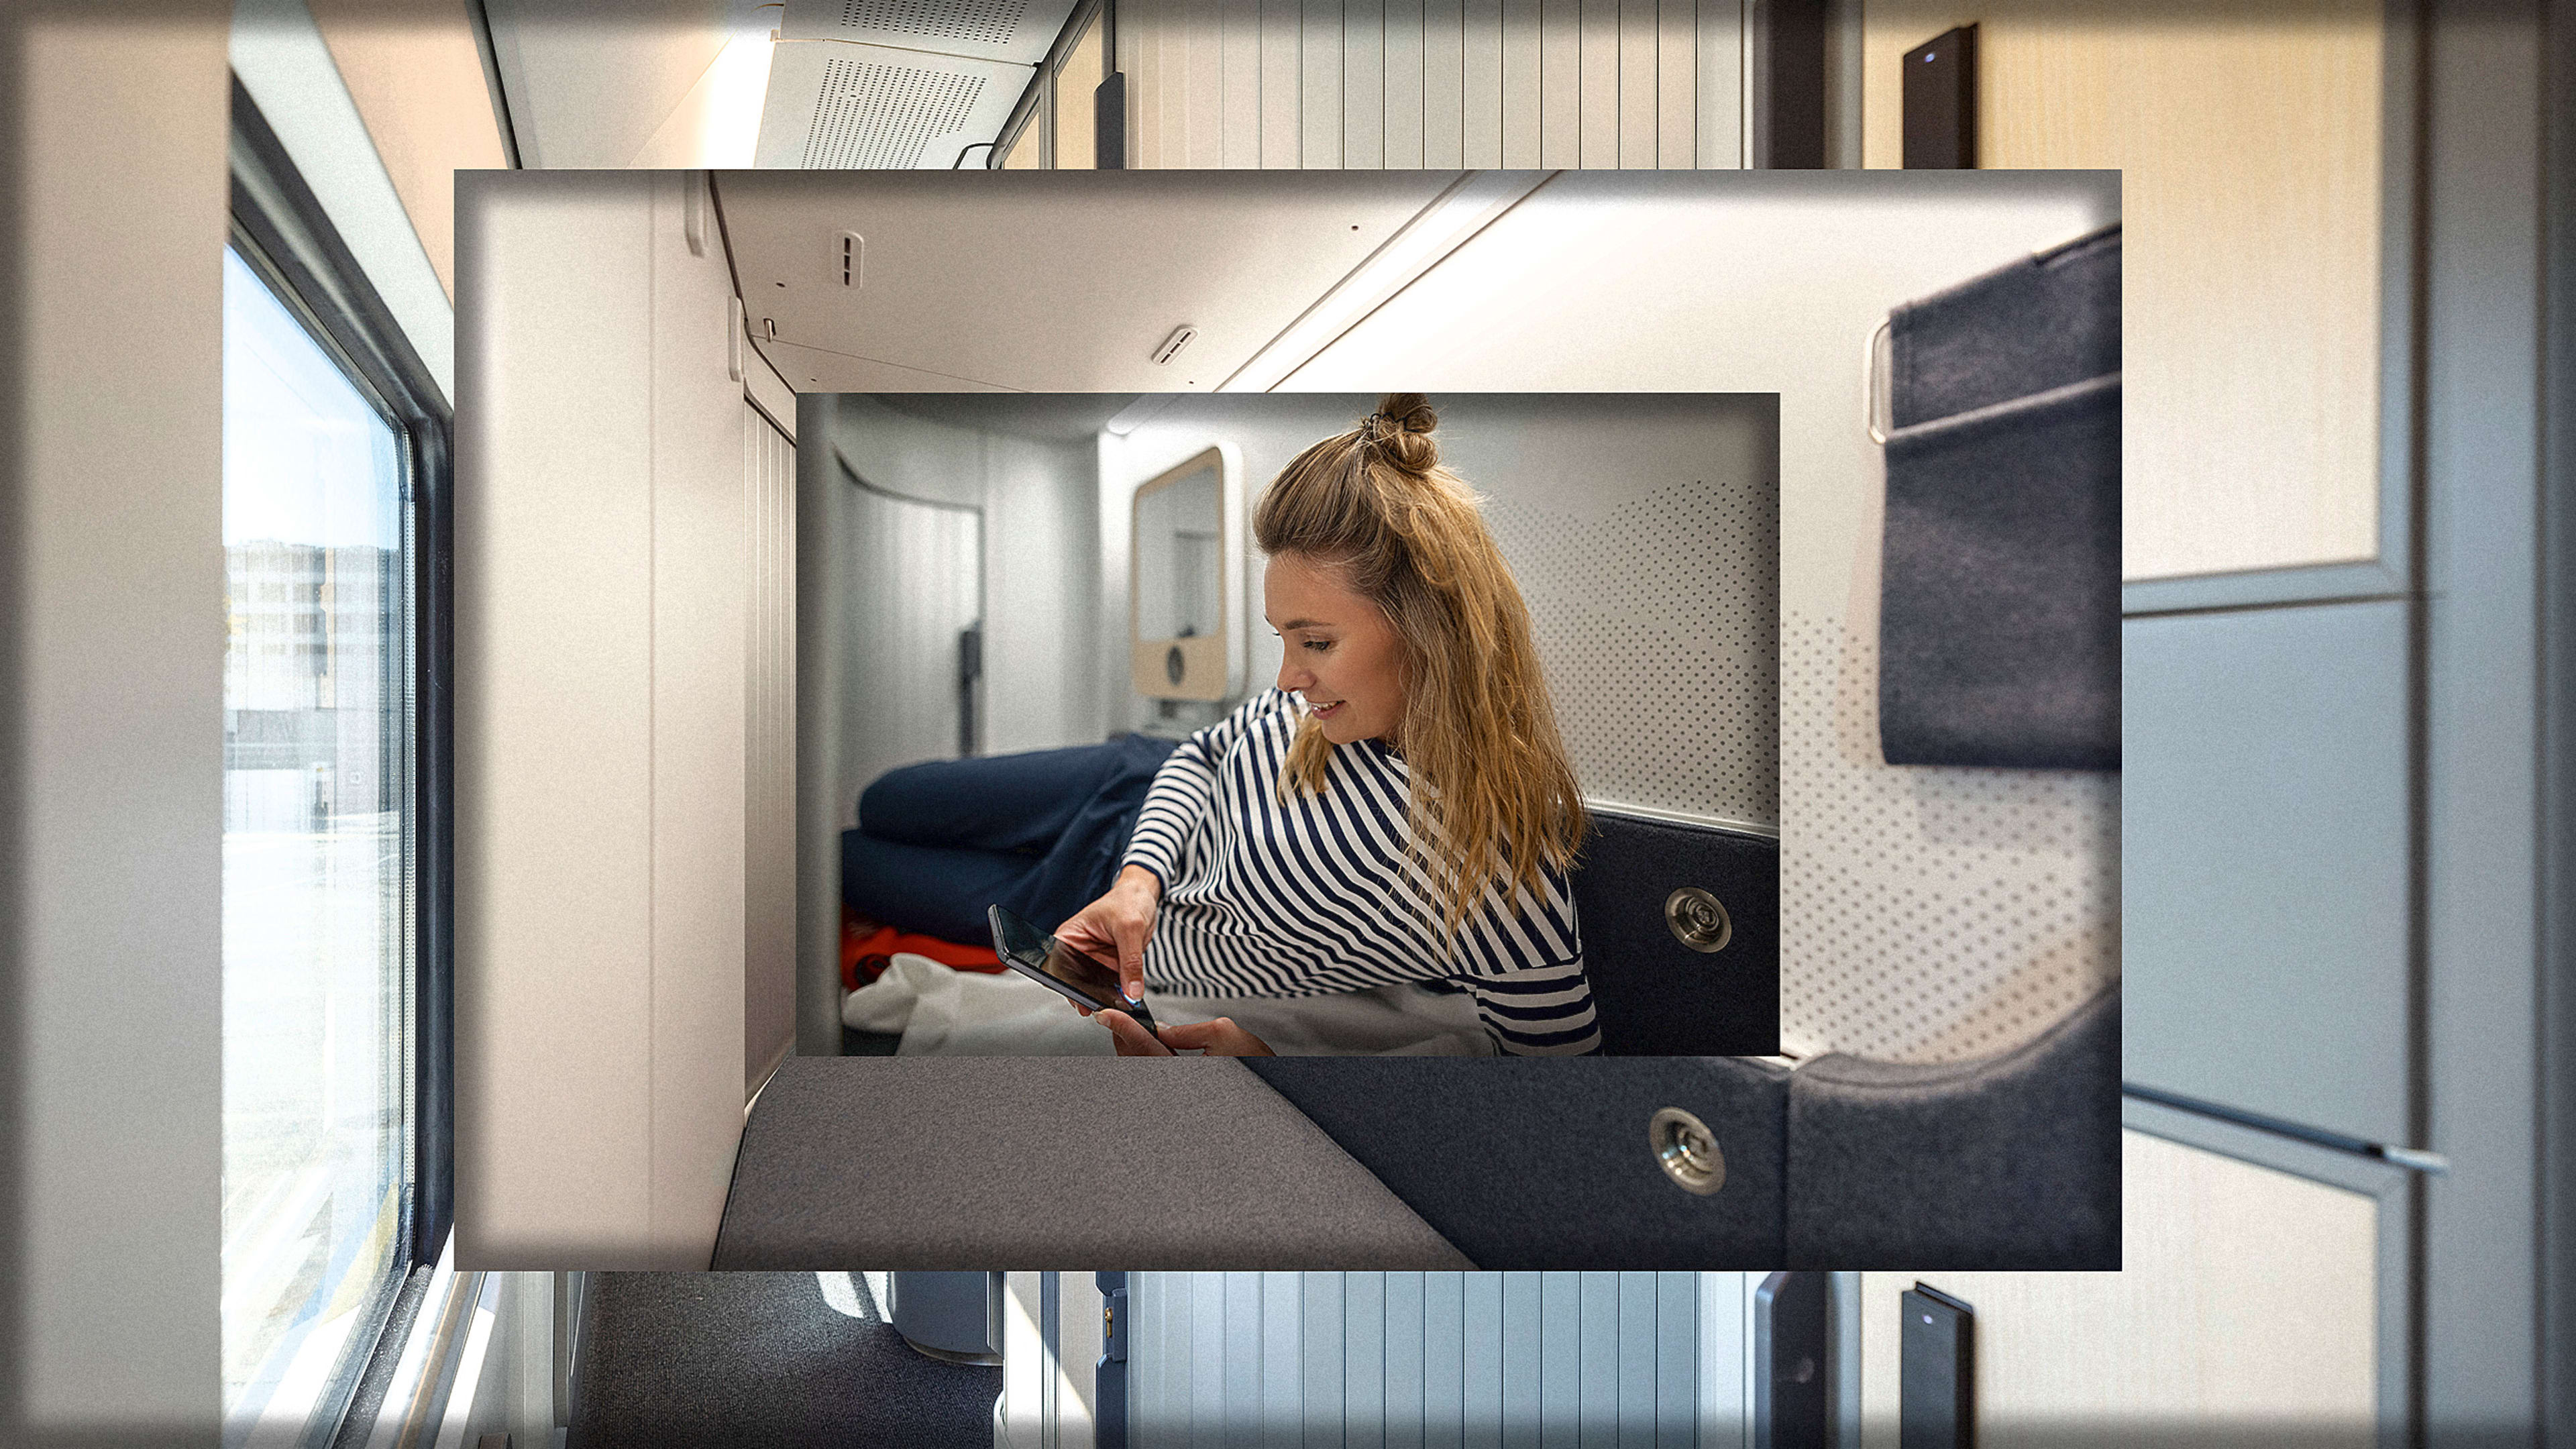 This new coffin-size train cabin could be the future of overnight rail travel